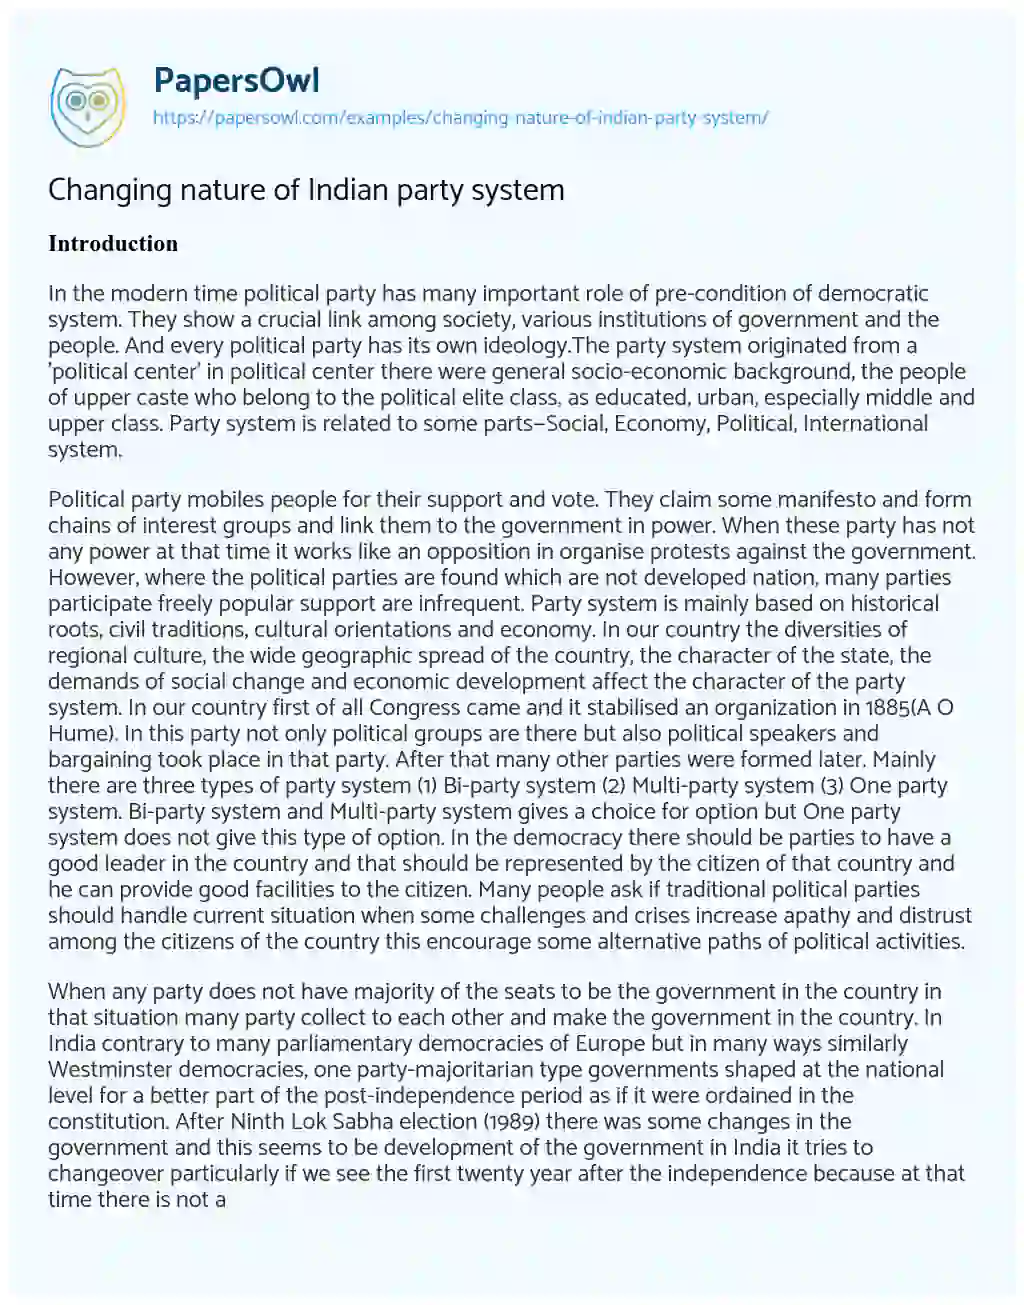 Essay on Changing Nature of Indian Party System